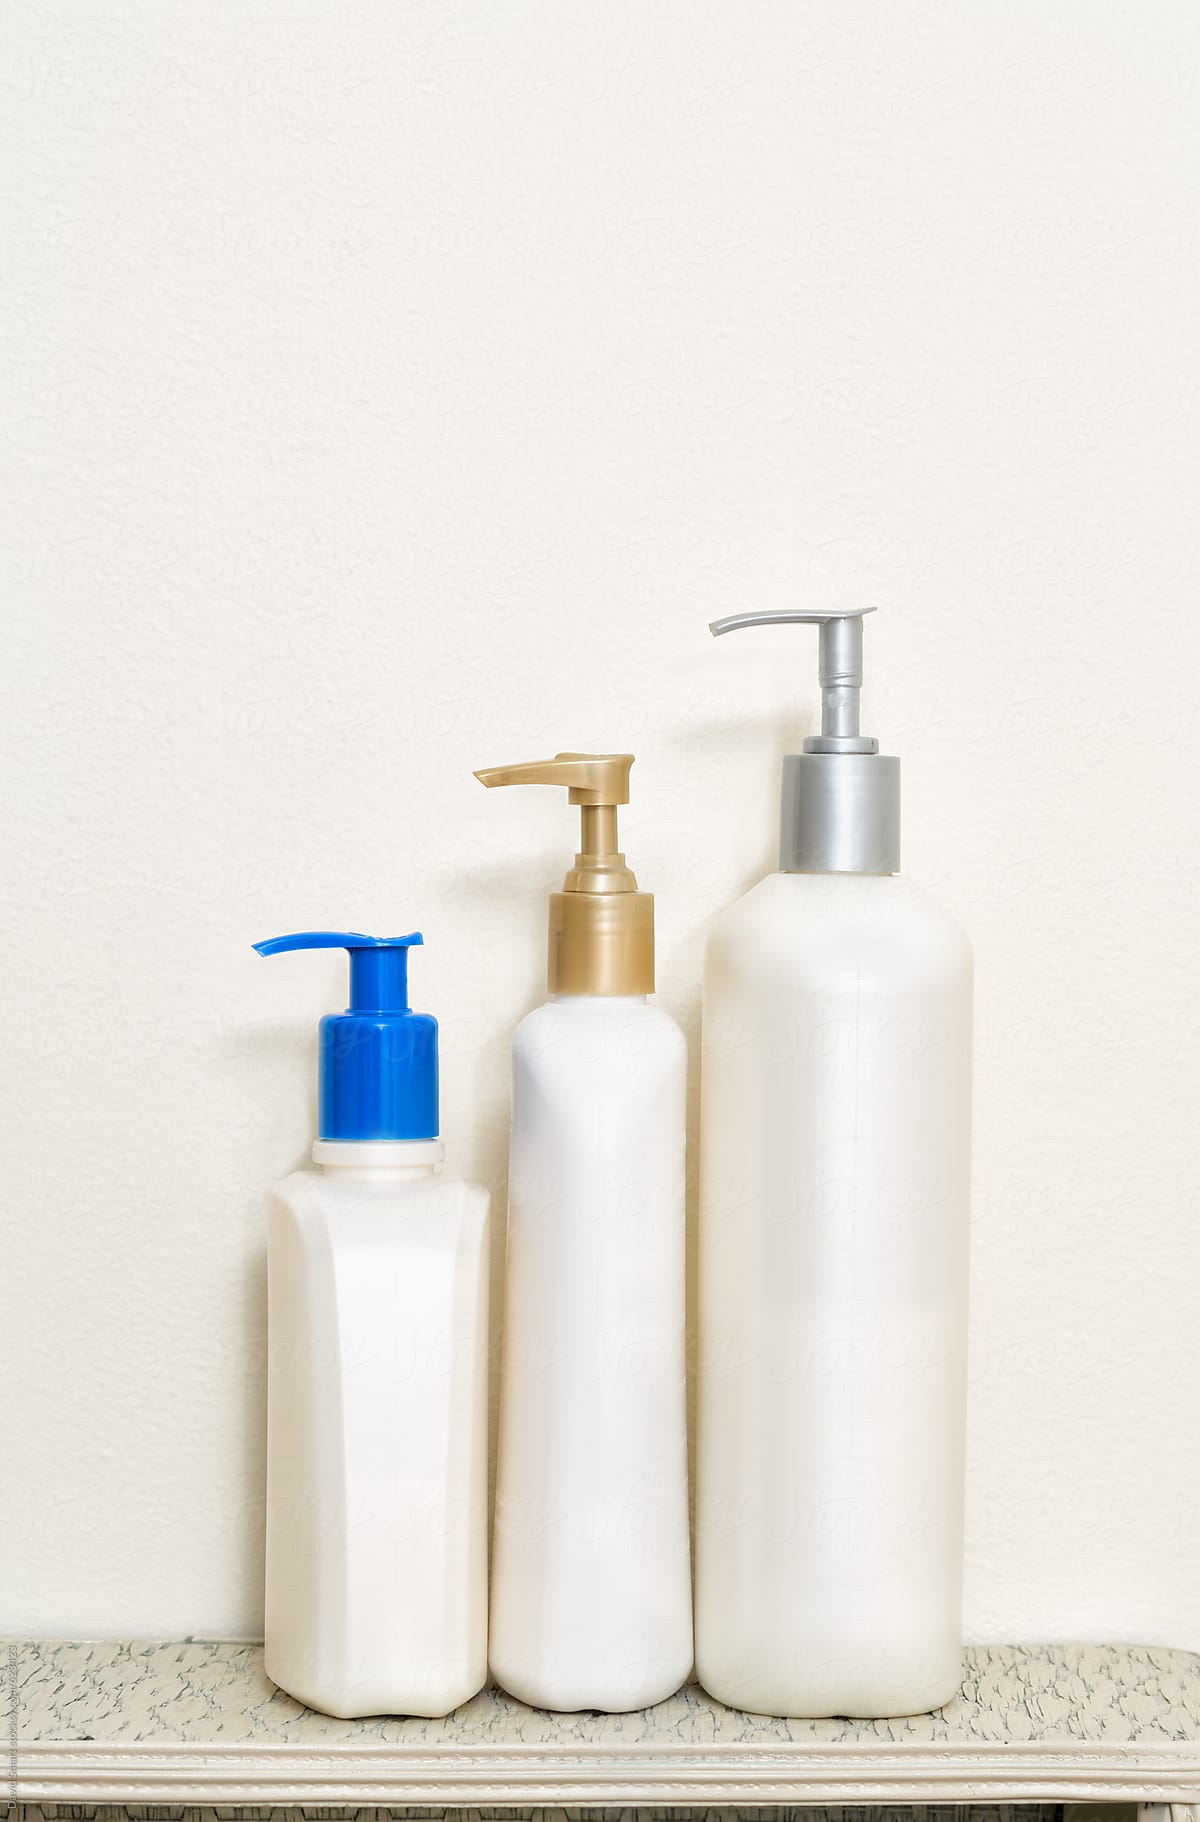 Three hand and body lotion bottles with pump dispensers